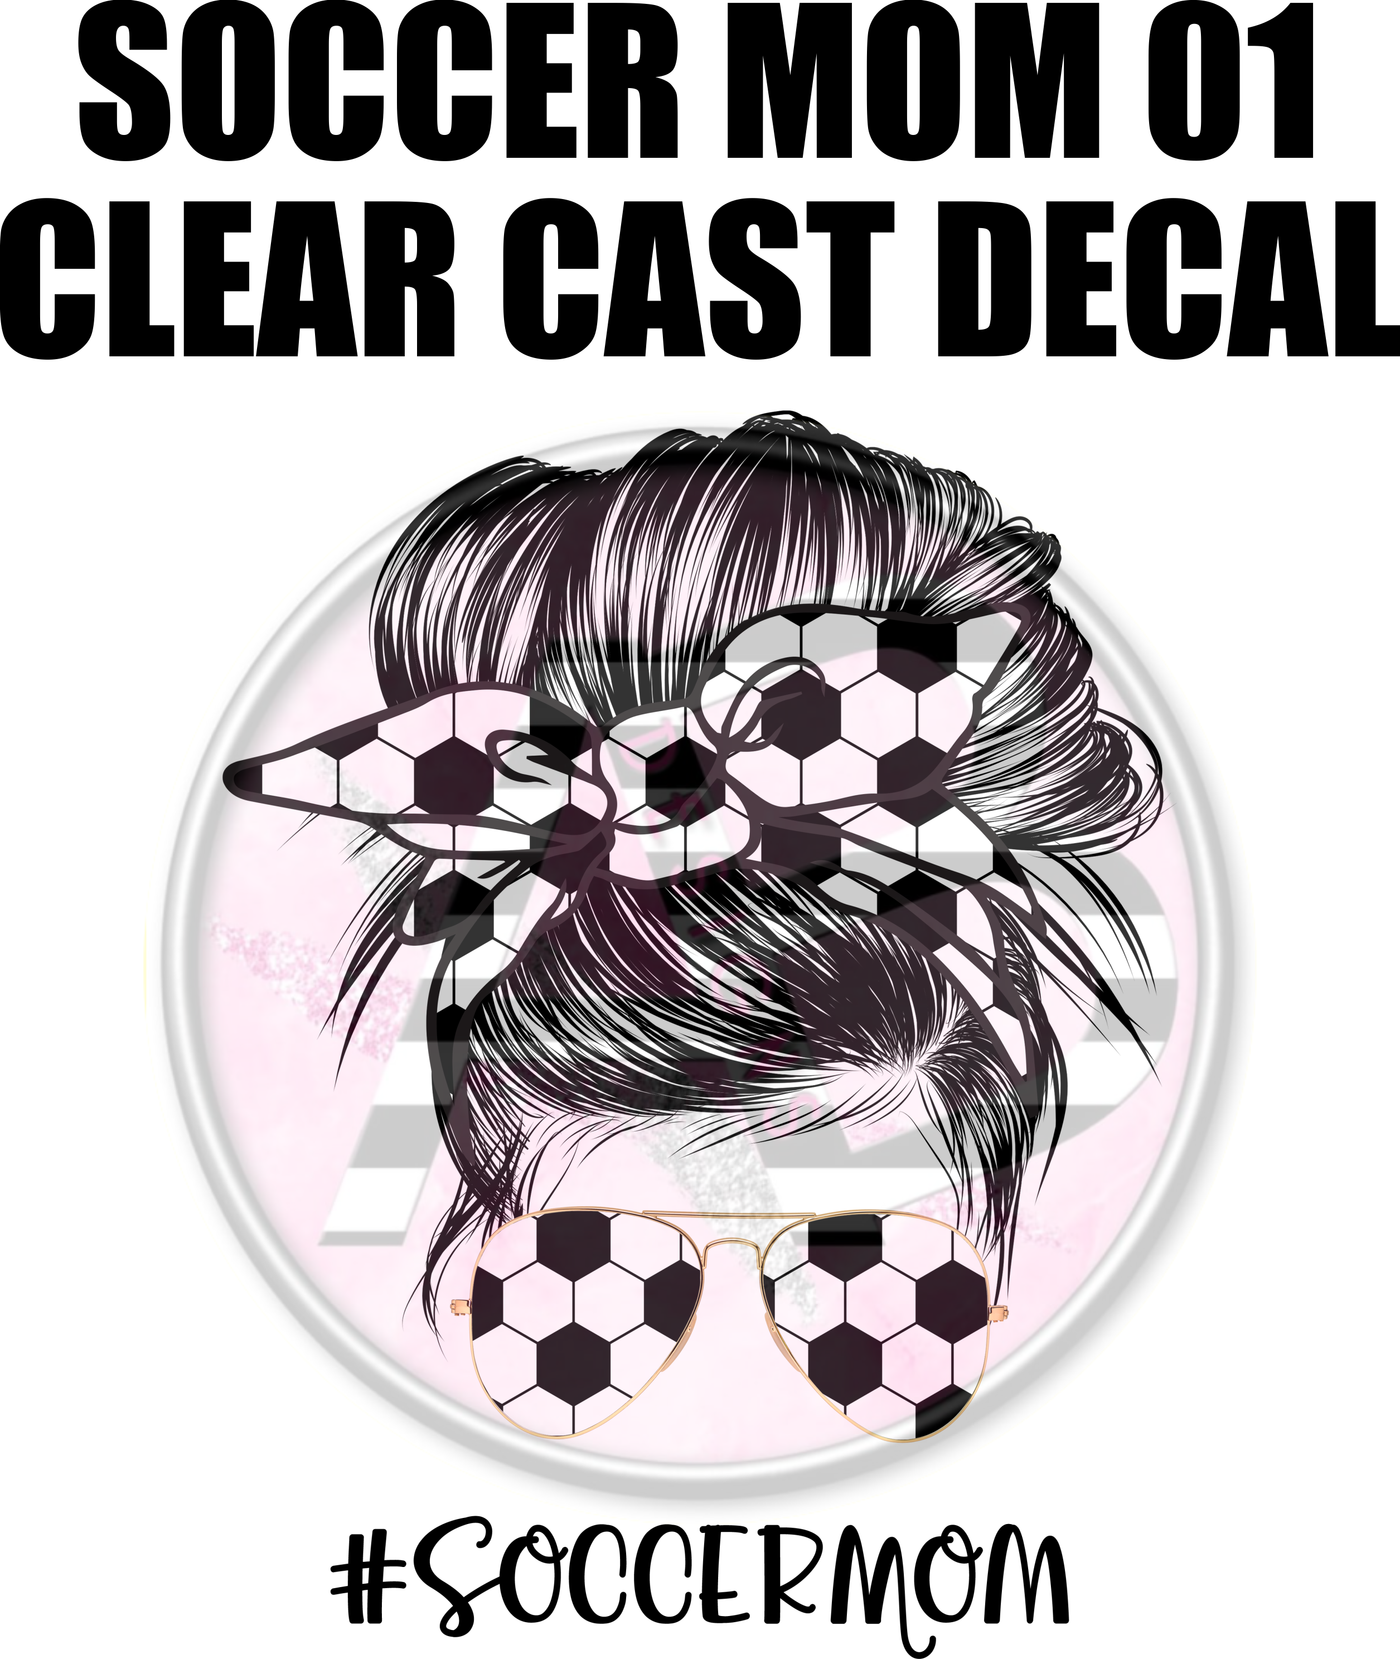 Soccer Mom 01 - Clear Cast Decal